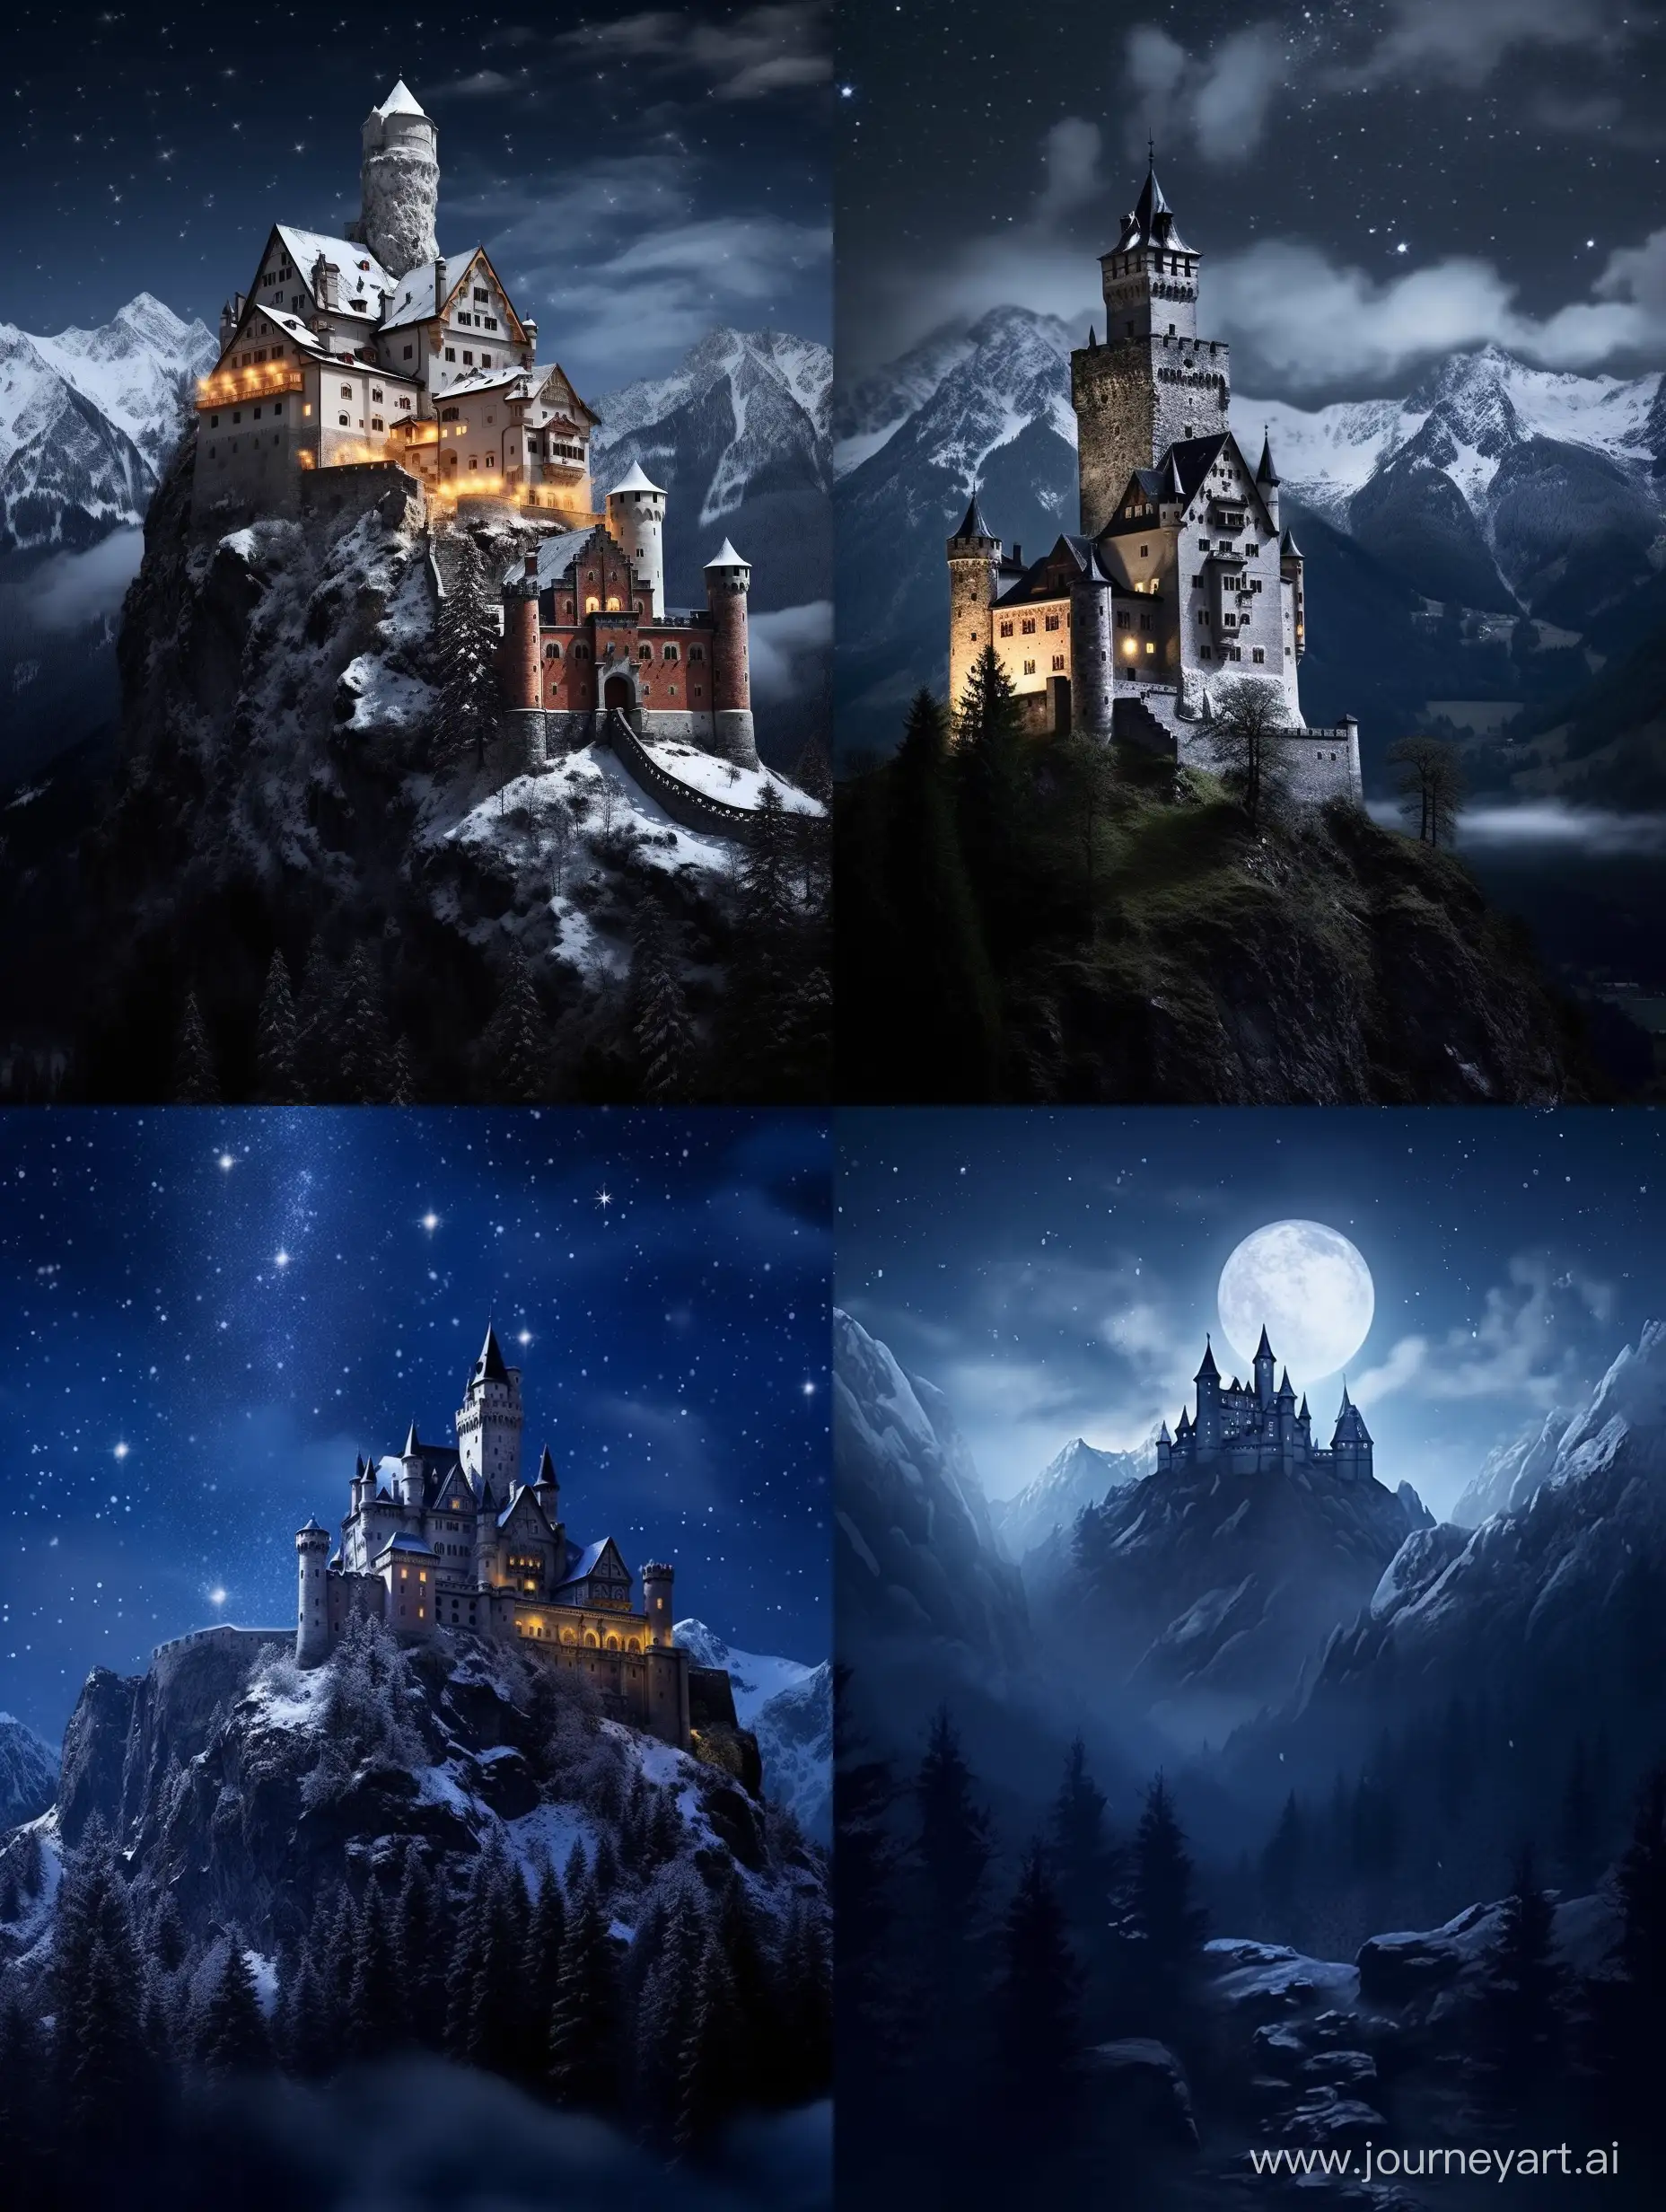 Mysterious-Castle-on-Mountain-Princess-in-Haunting-Isolation